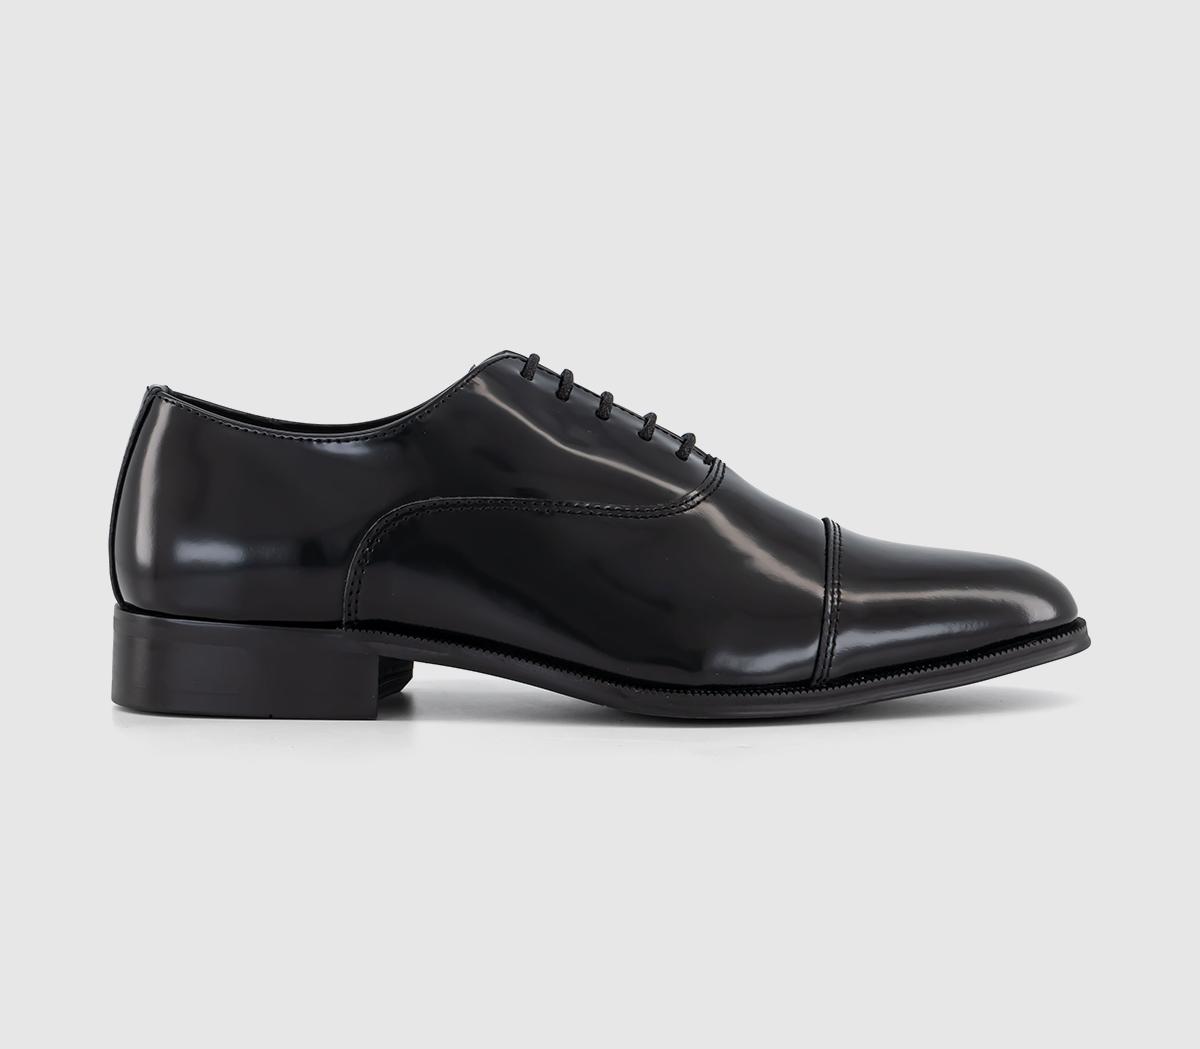 OFFICEManor Toe Cap Oxford ShoesBlack Leather